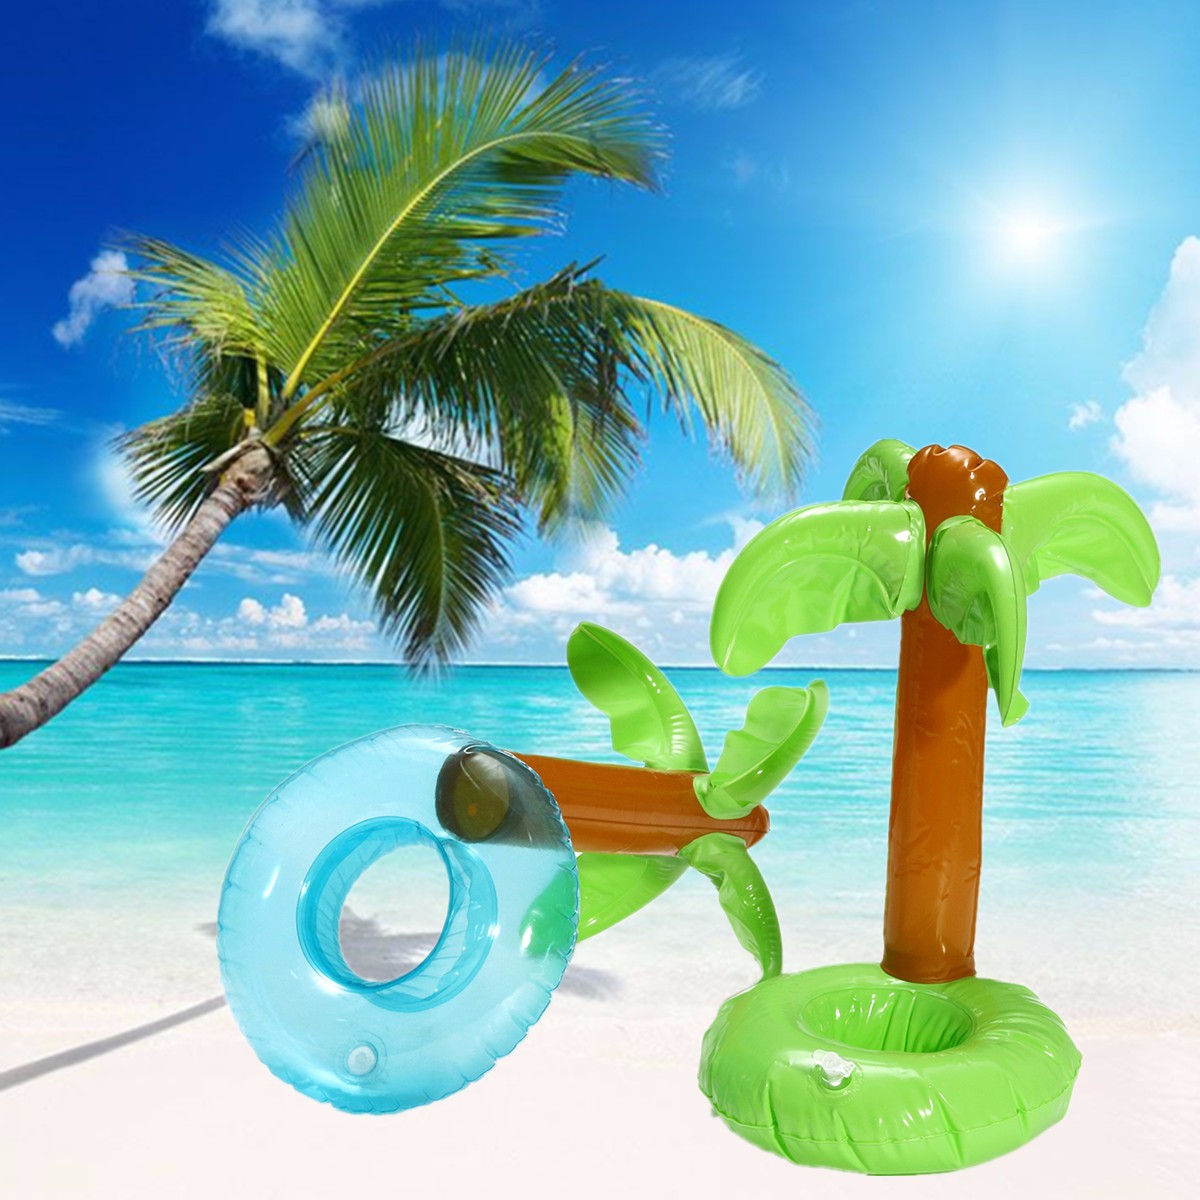 IPReetrade-Inflatable-Coconut-Tree-Drink-Can-Cup-Phone-Holder-Floating-Cup-Base-Pool-Bath-Summer-Bea-1153194